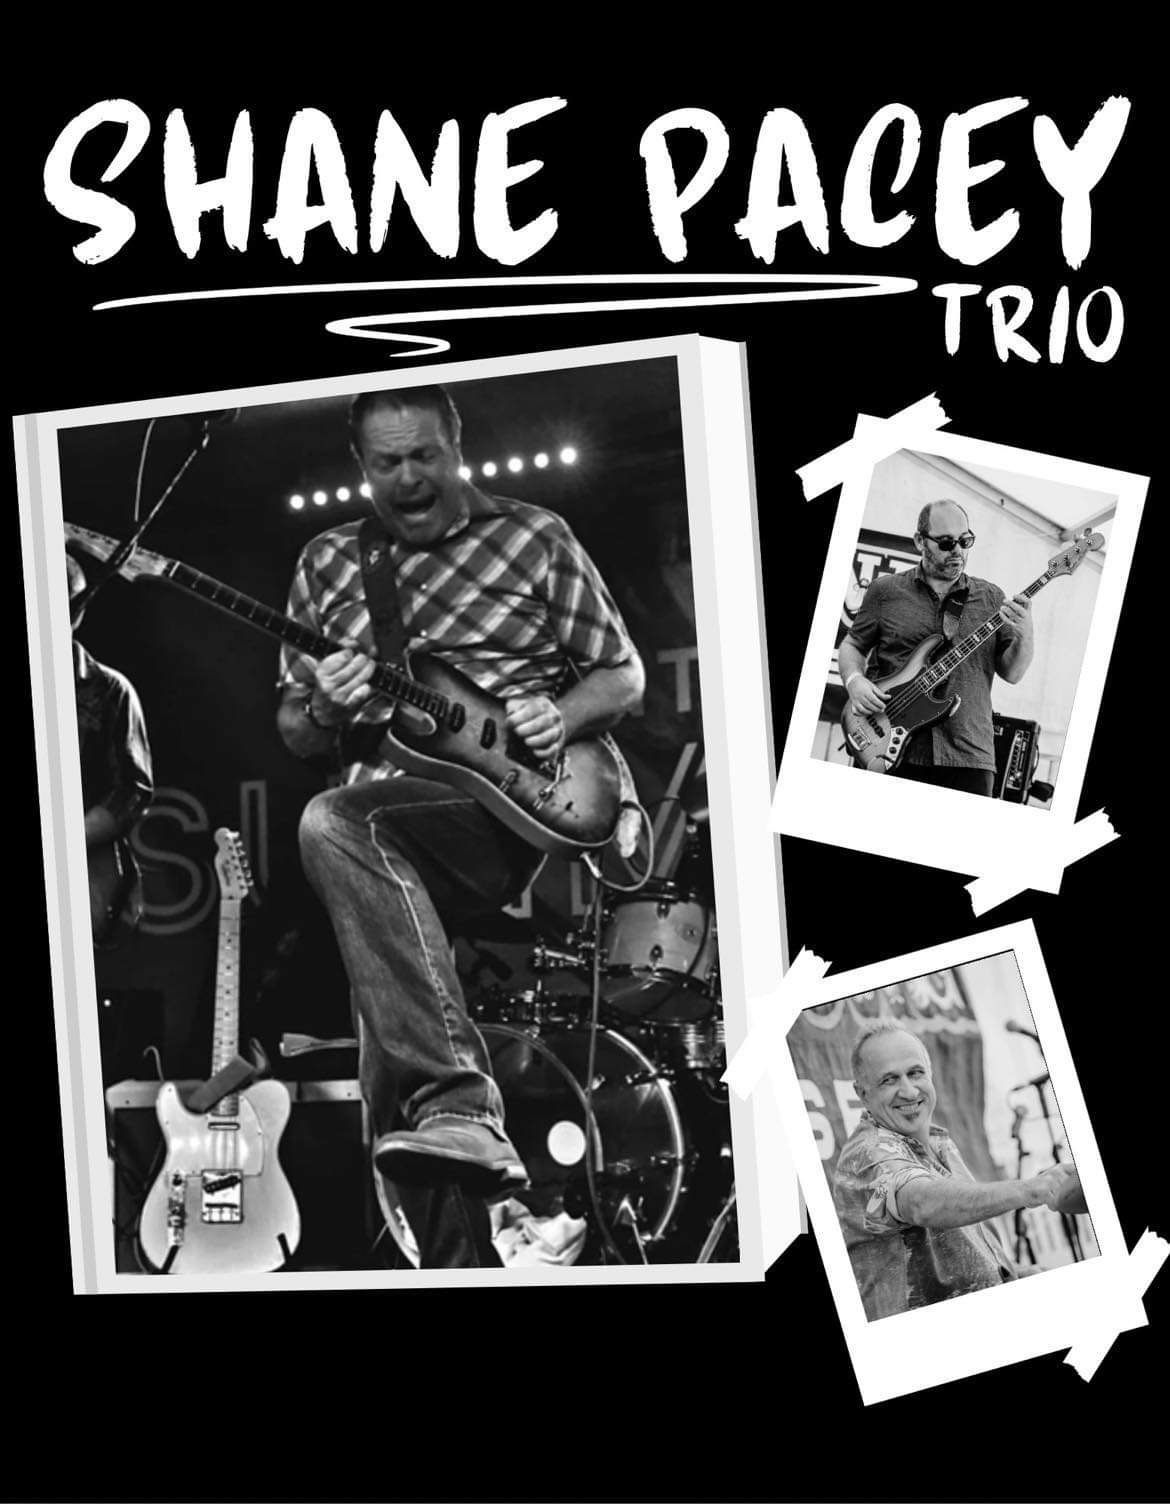 Shane Pacey Trio Three Brothers Arms Hotel Macclesfield The Three